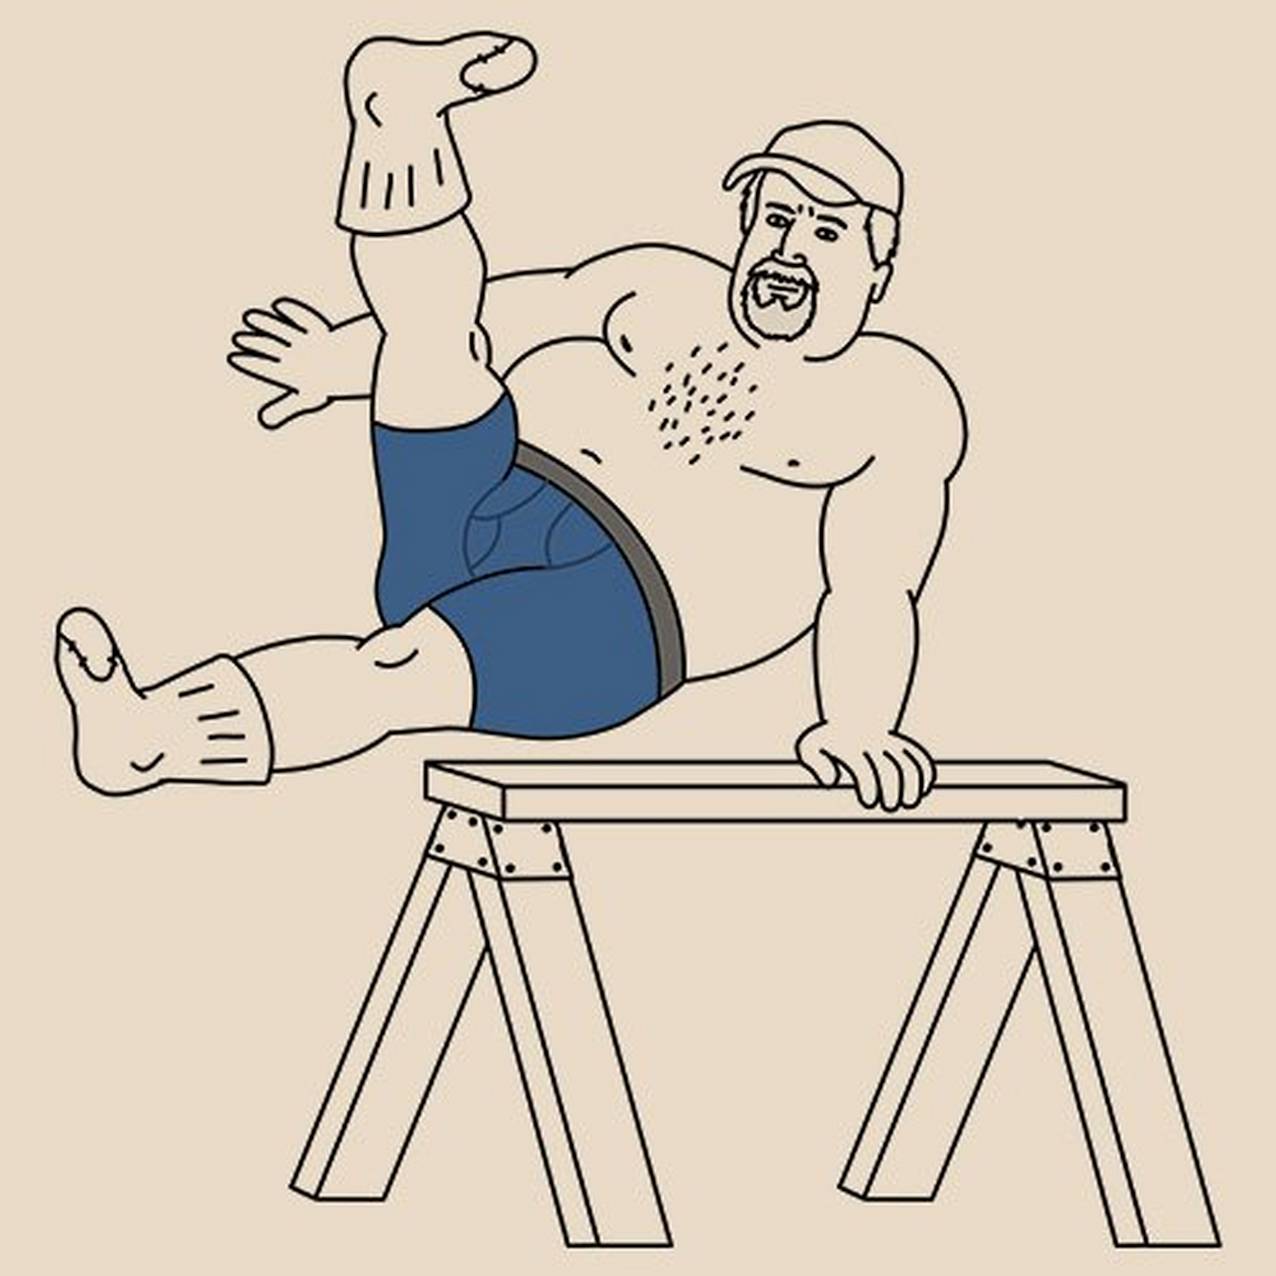 humorous illustration of the Buck character doing pommel horse exercises on a saw horse